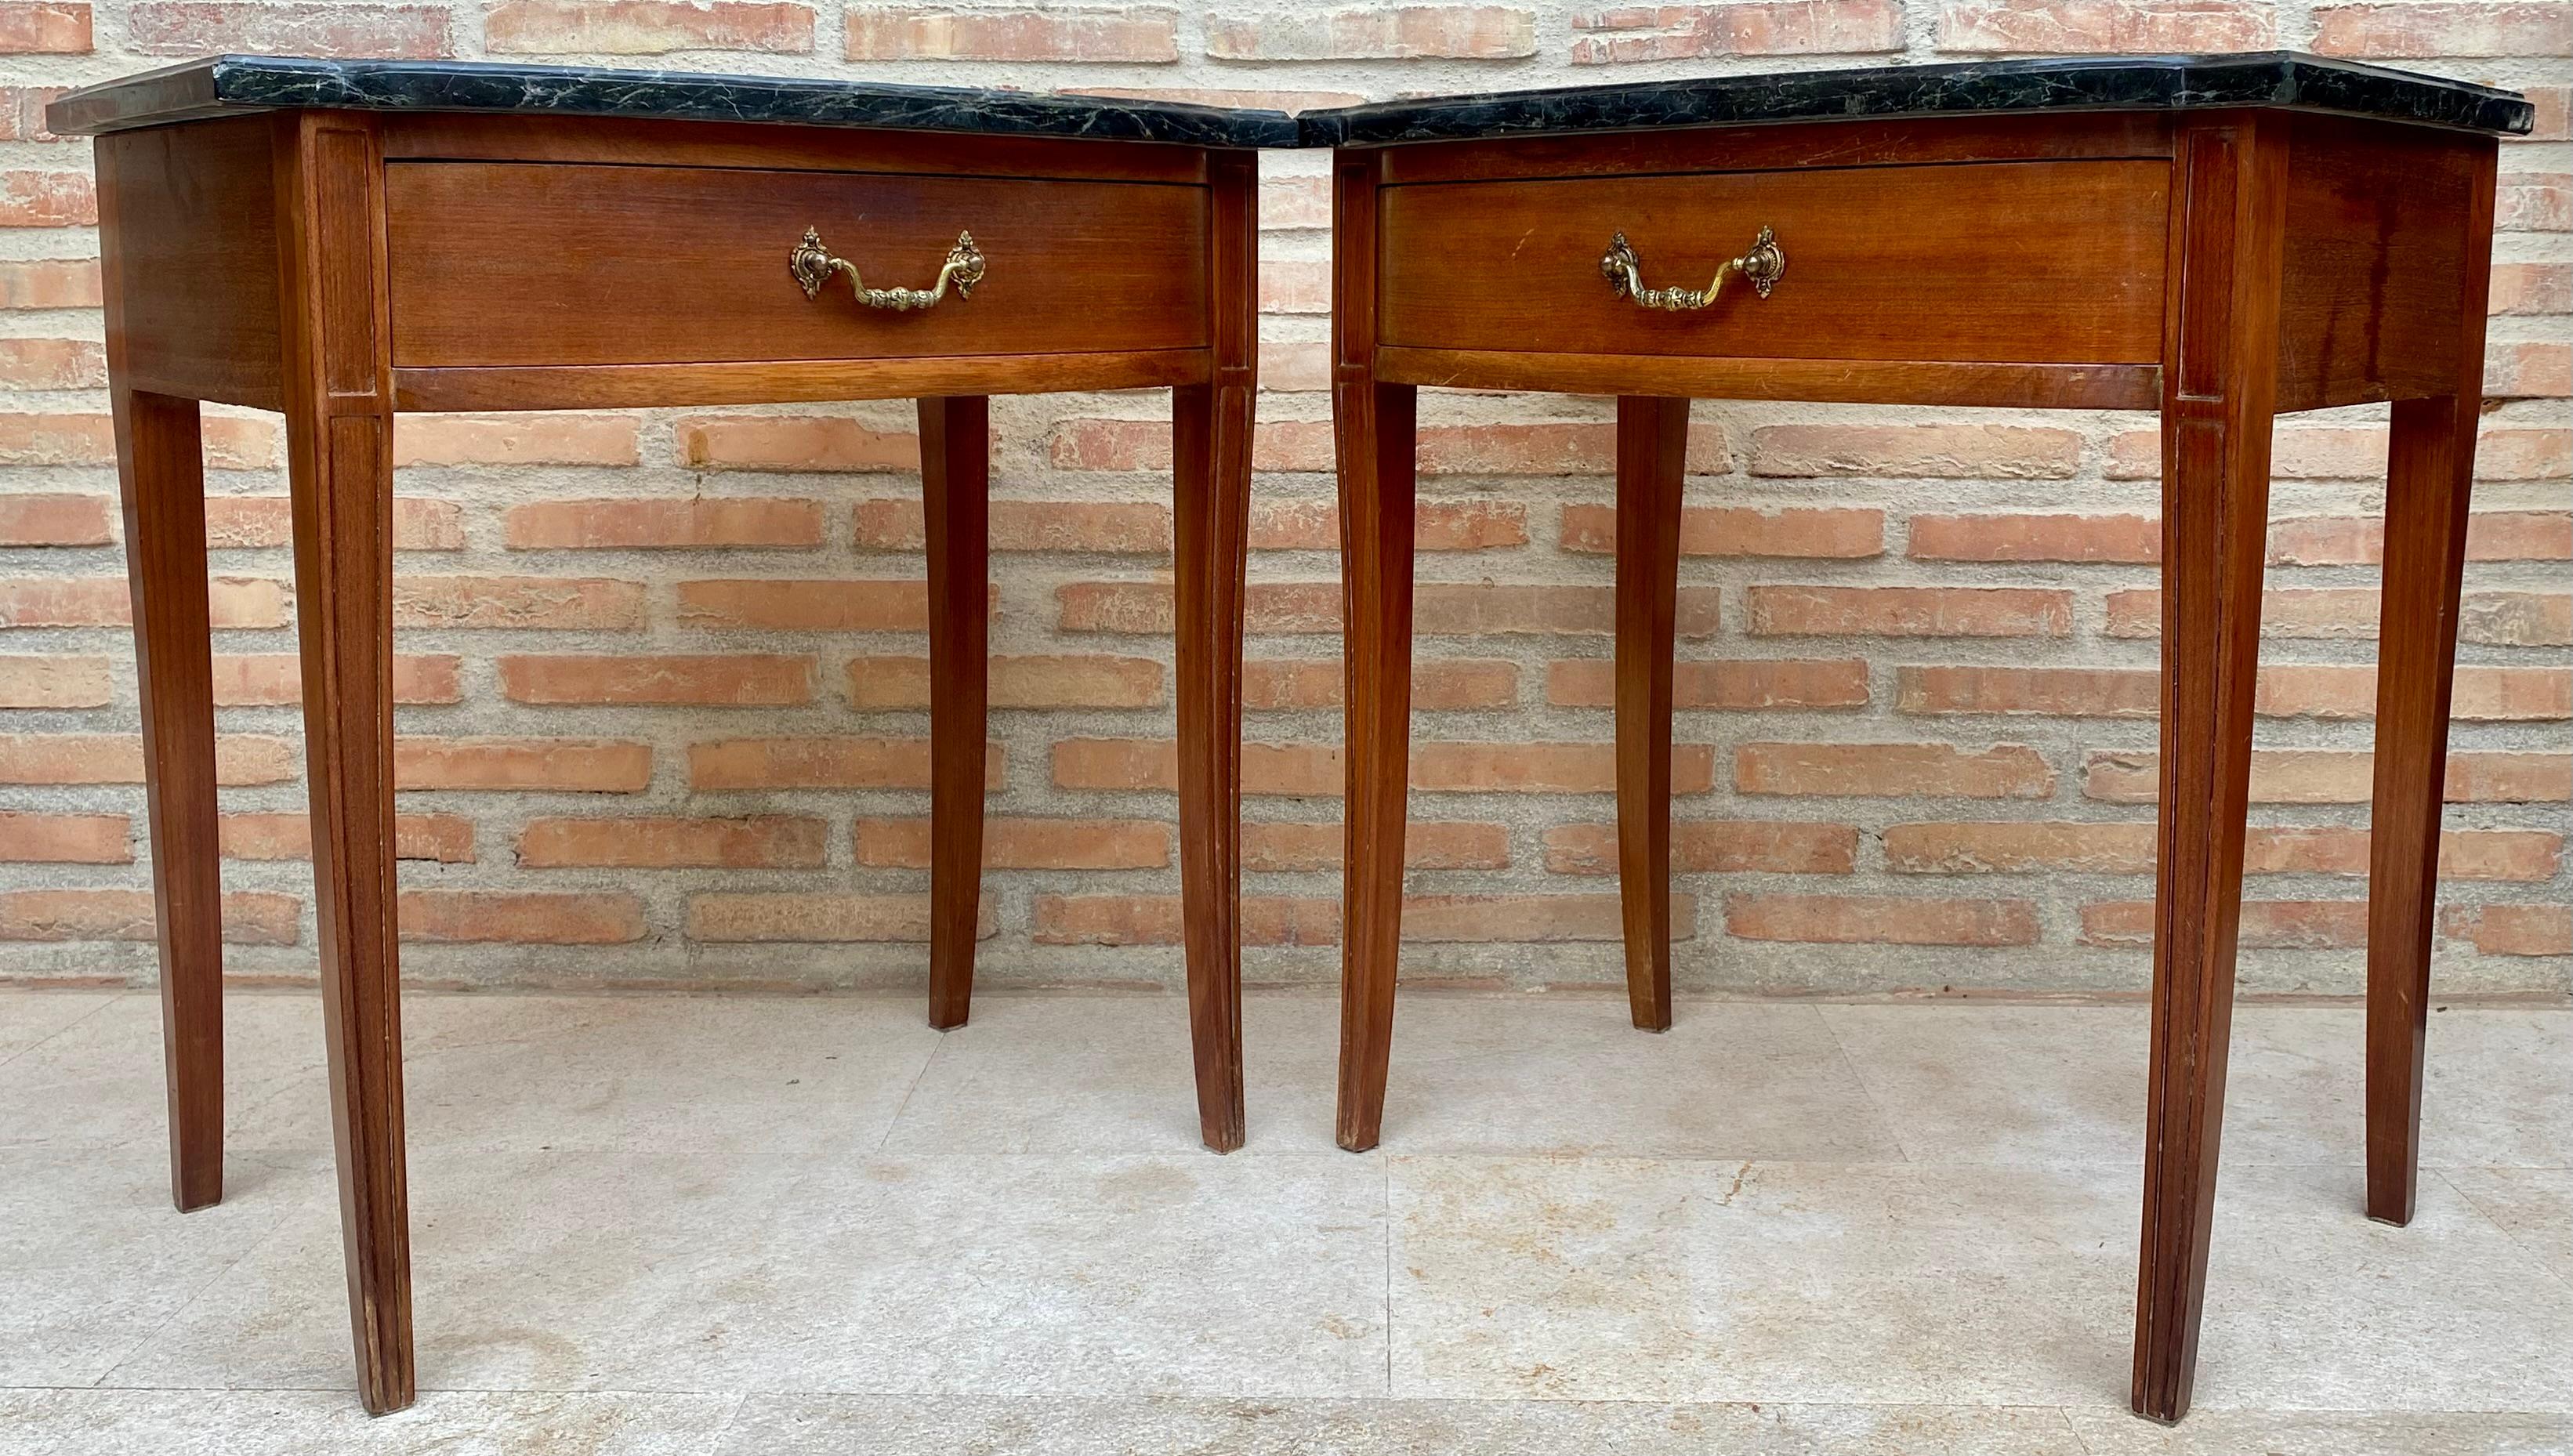 
Early 20th century Spanish Console Table with One Drawer. Early 20th Spanish console table with two pedestal legs joined by a carved bar stretcher.